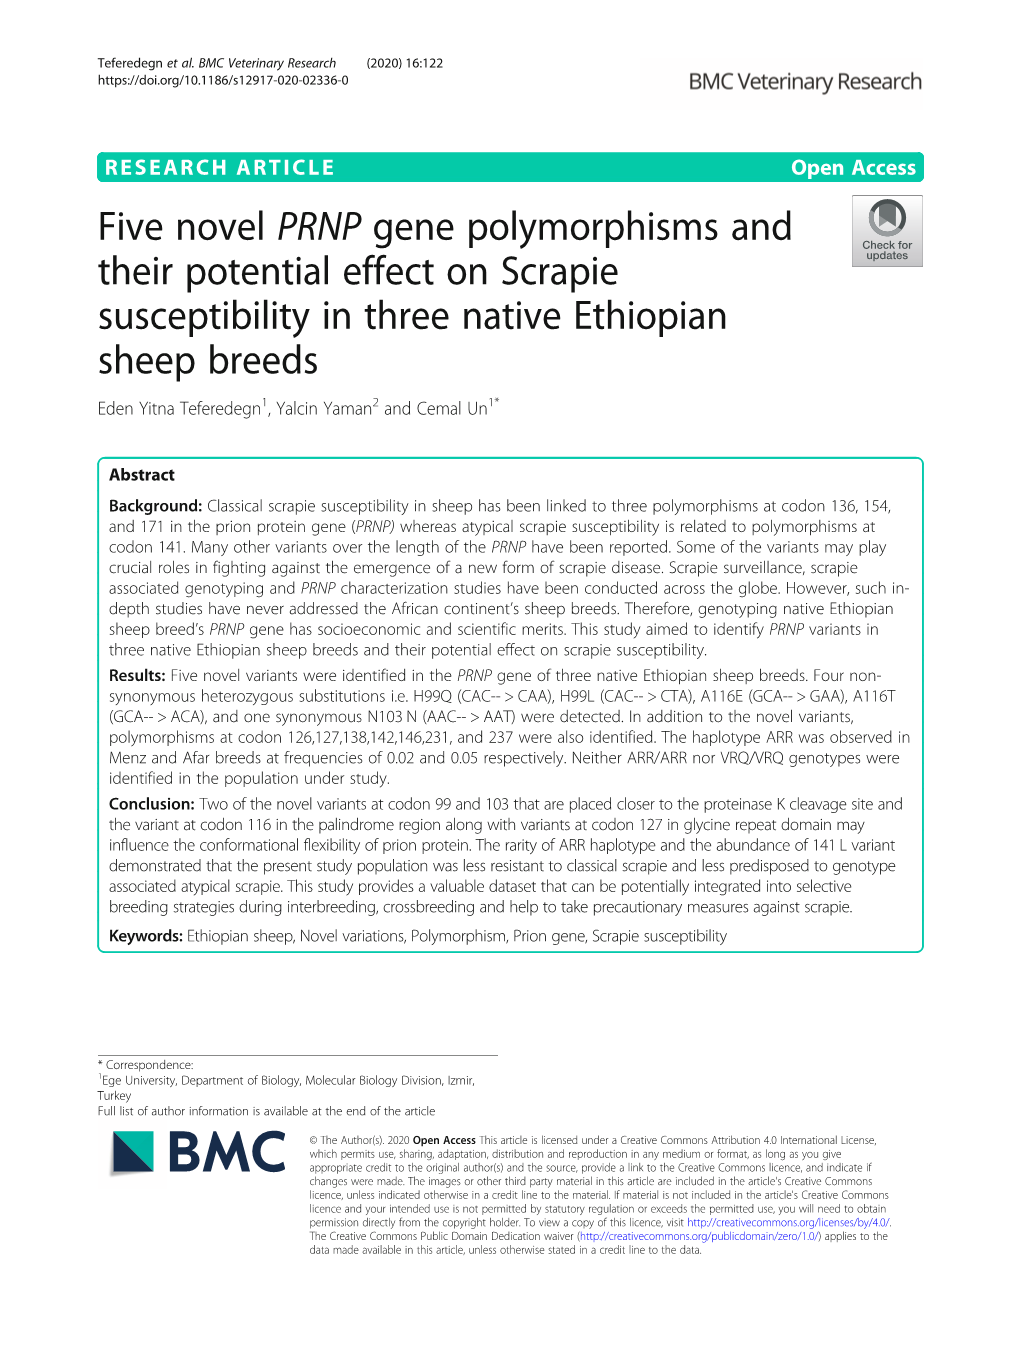 Five Novel PRNP Gene Polymorphisms and Their Potential